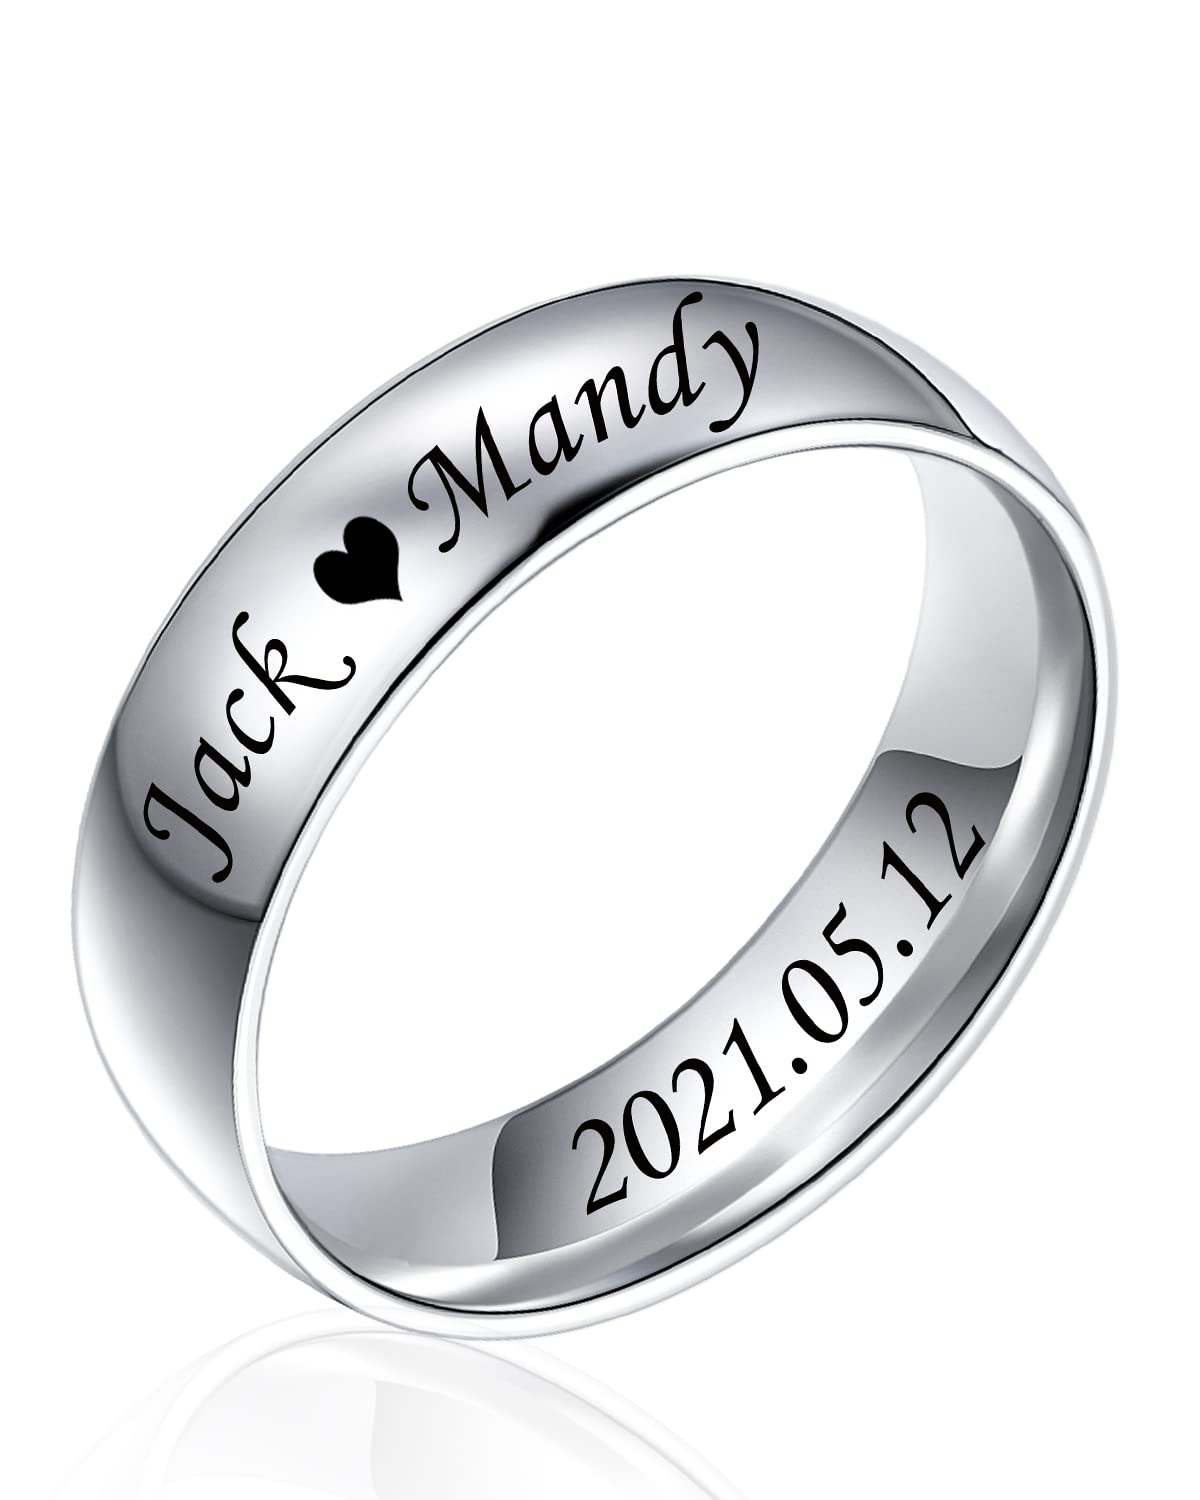 Fanery sue Custom Personalized Engraved Name Ring for Men and Women Customizable 4MM/6MM Stainless Steel Stackable Simple Dome Couples Promise Rings Wedding Anniversary Band Mother's Day Gift